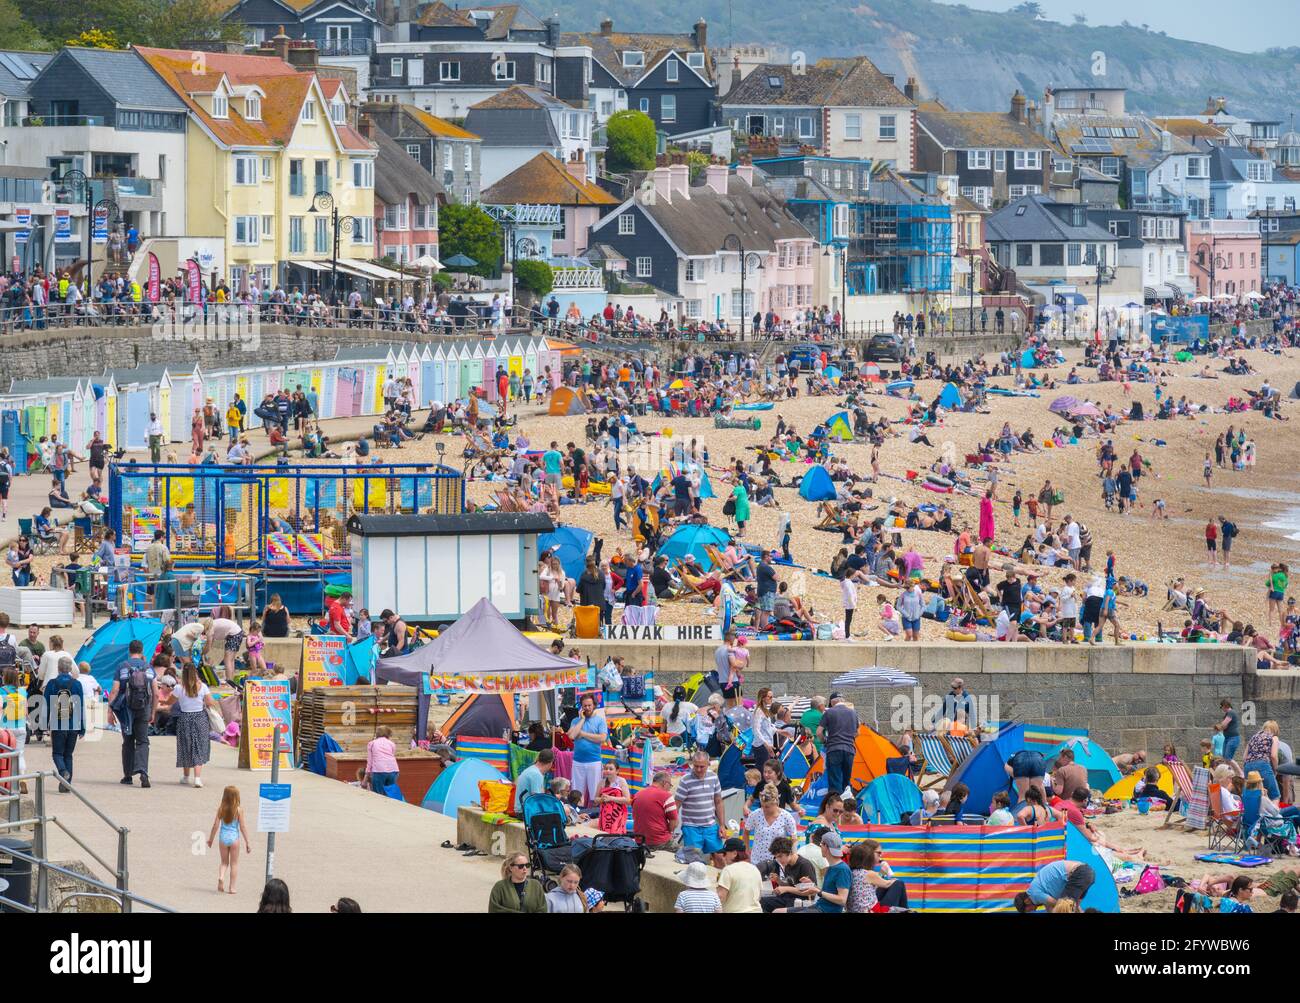 Lyme Regis, Dorset, UK. 30th May, 2021. UK Weather. Beaches and car parks are packed at the seaside resort of Lyme Regis on the bank holiday weekend as visitors flock to the beach to enjoy scorching hot sunsine as the heatwave continues. Credit: Celia McMahon/Alamy Live News Stock Photo